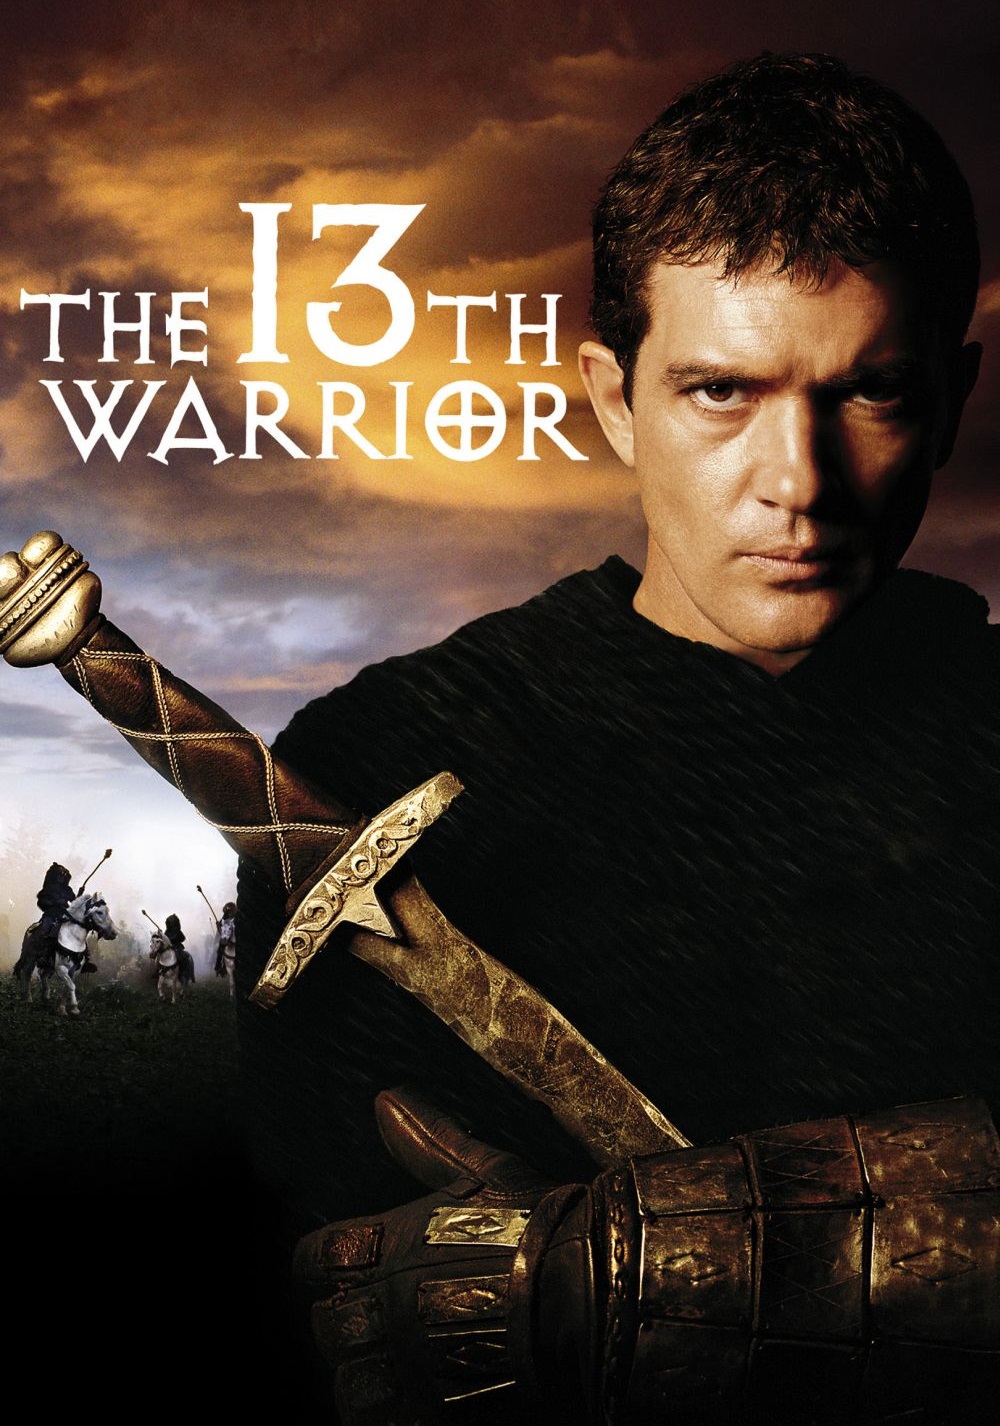 The 13th Warrior Images. 